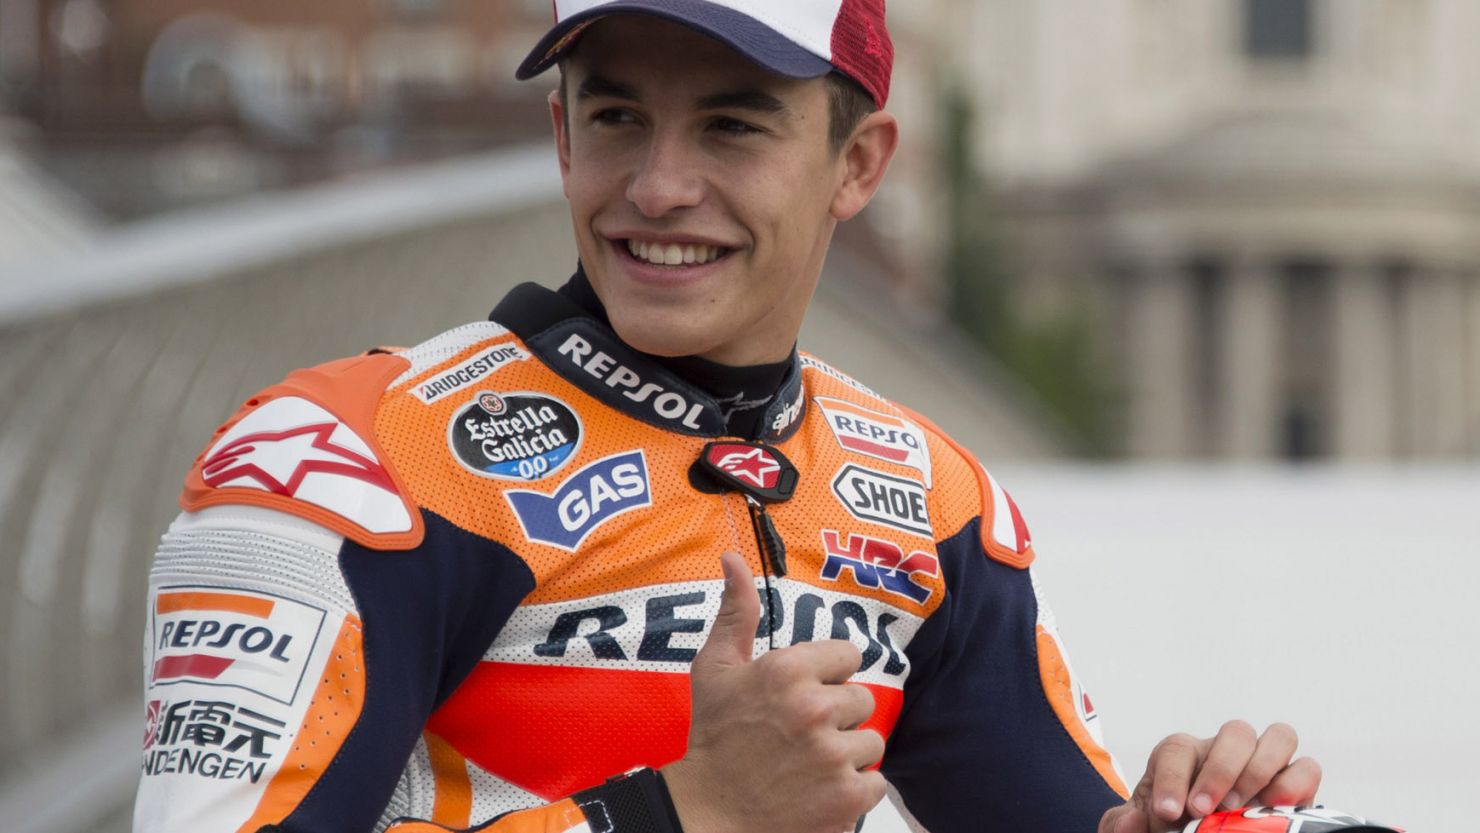 Marc Marquez has proved unstoppable in 2014 and clinched is 12th win in Malaysia.